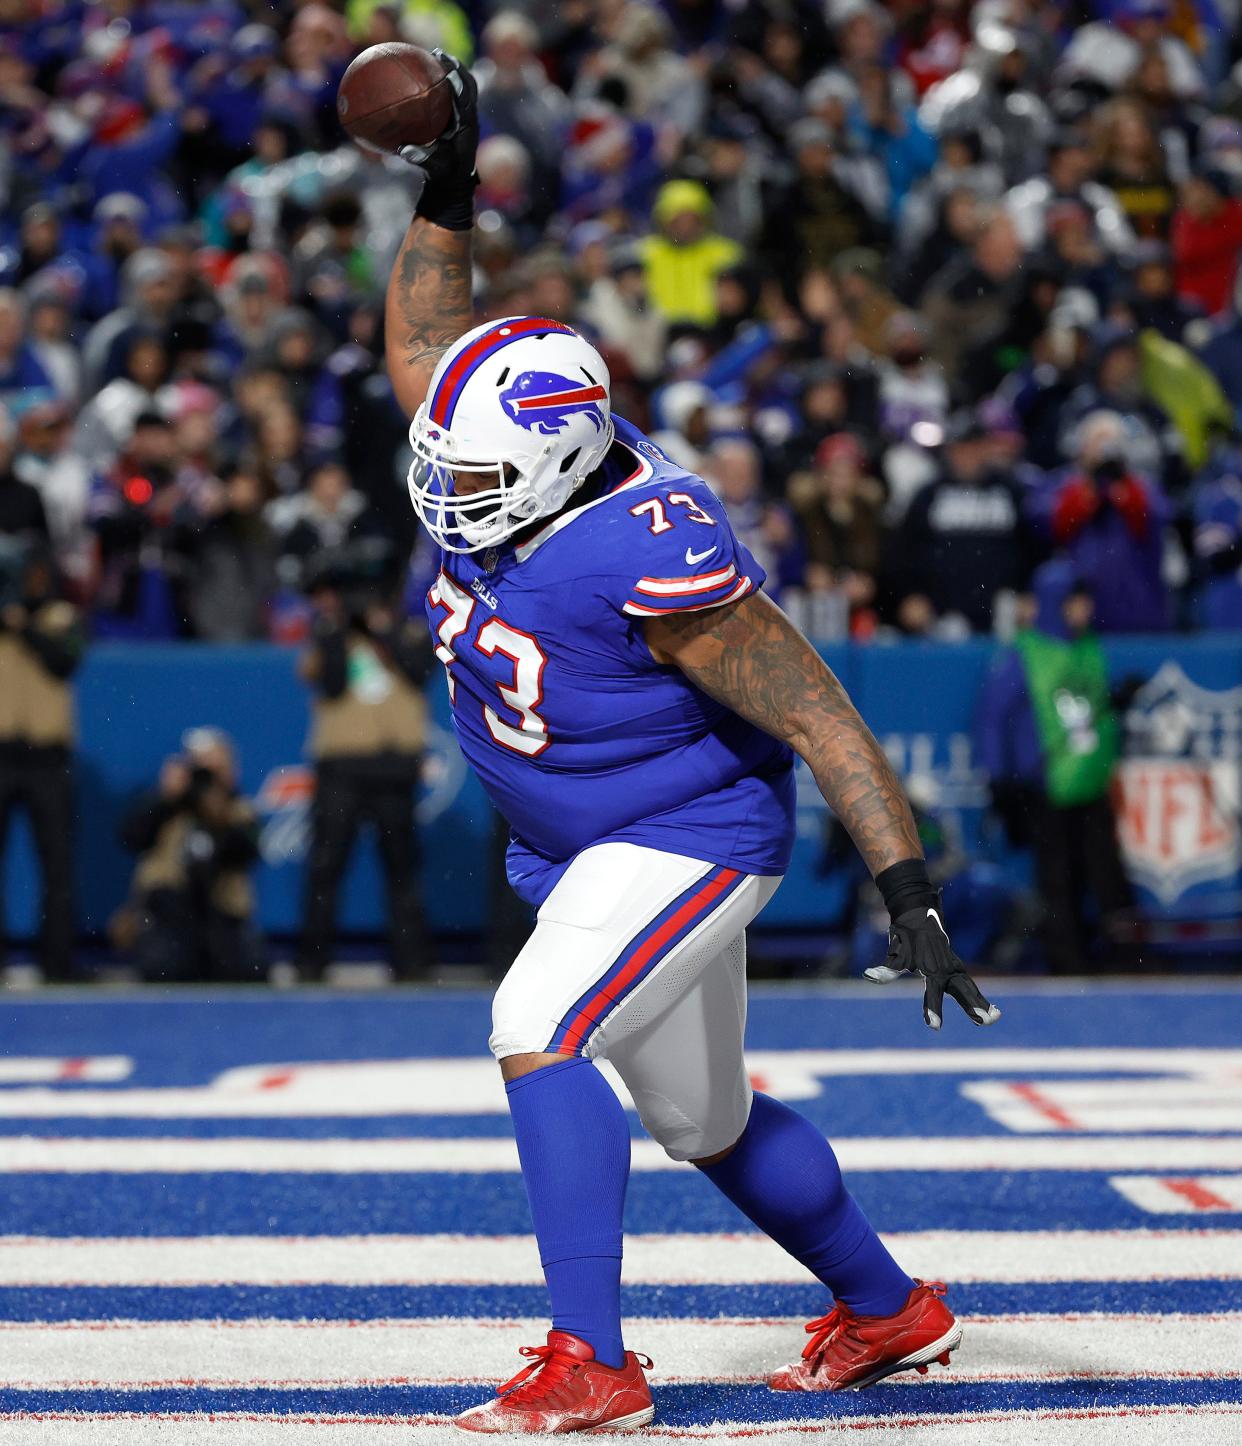 Dion Dawkins and the Bills are back in prime-time Sunday night in Miami playing for the AFC East division title.